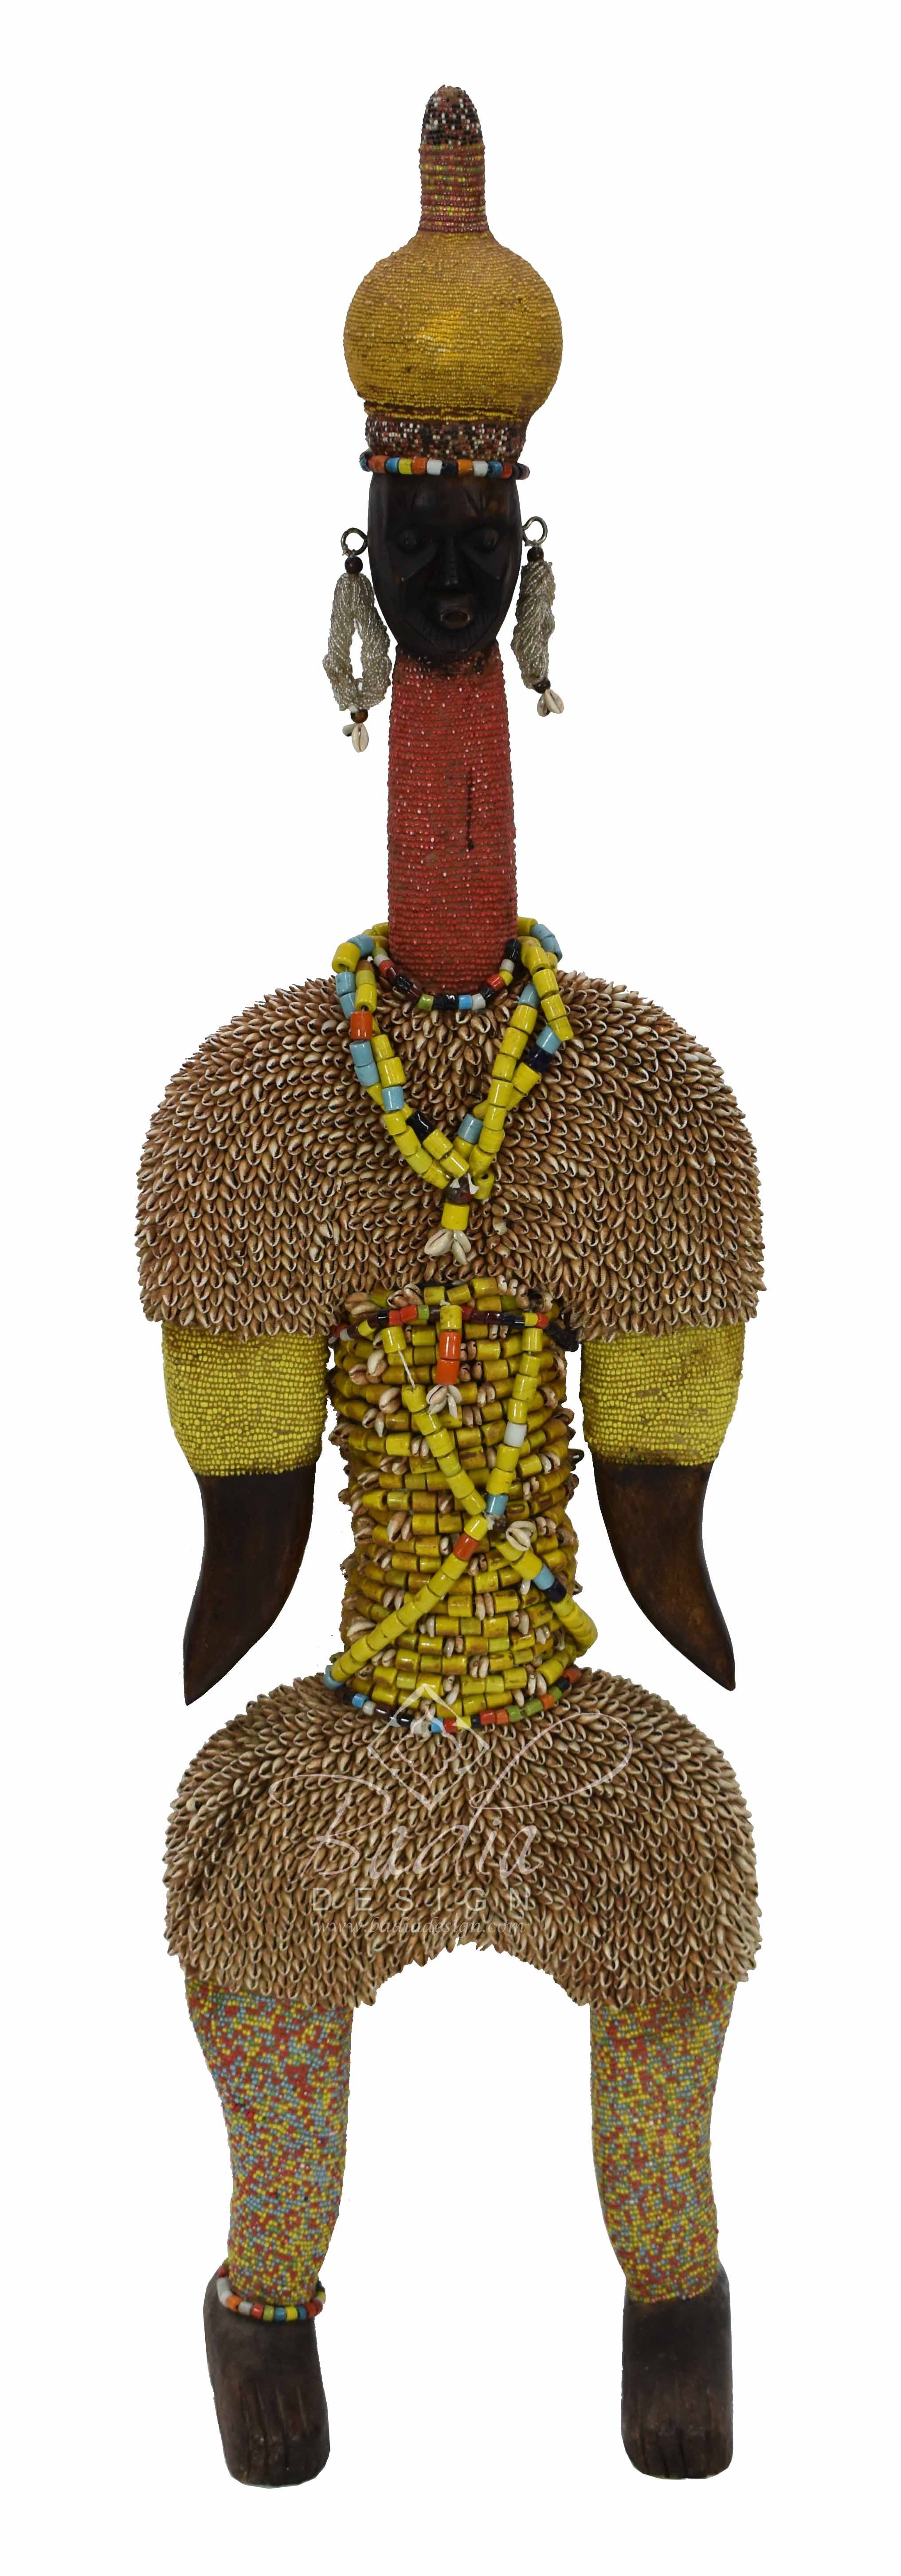 one-of-a-kind-african-beaded-sculpture-hd229.jpg